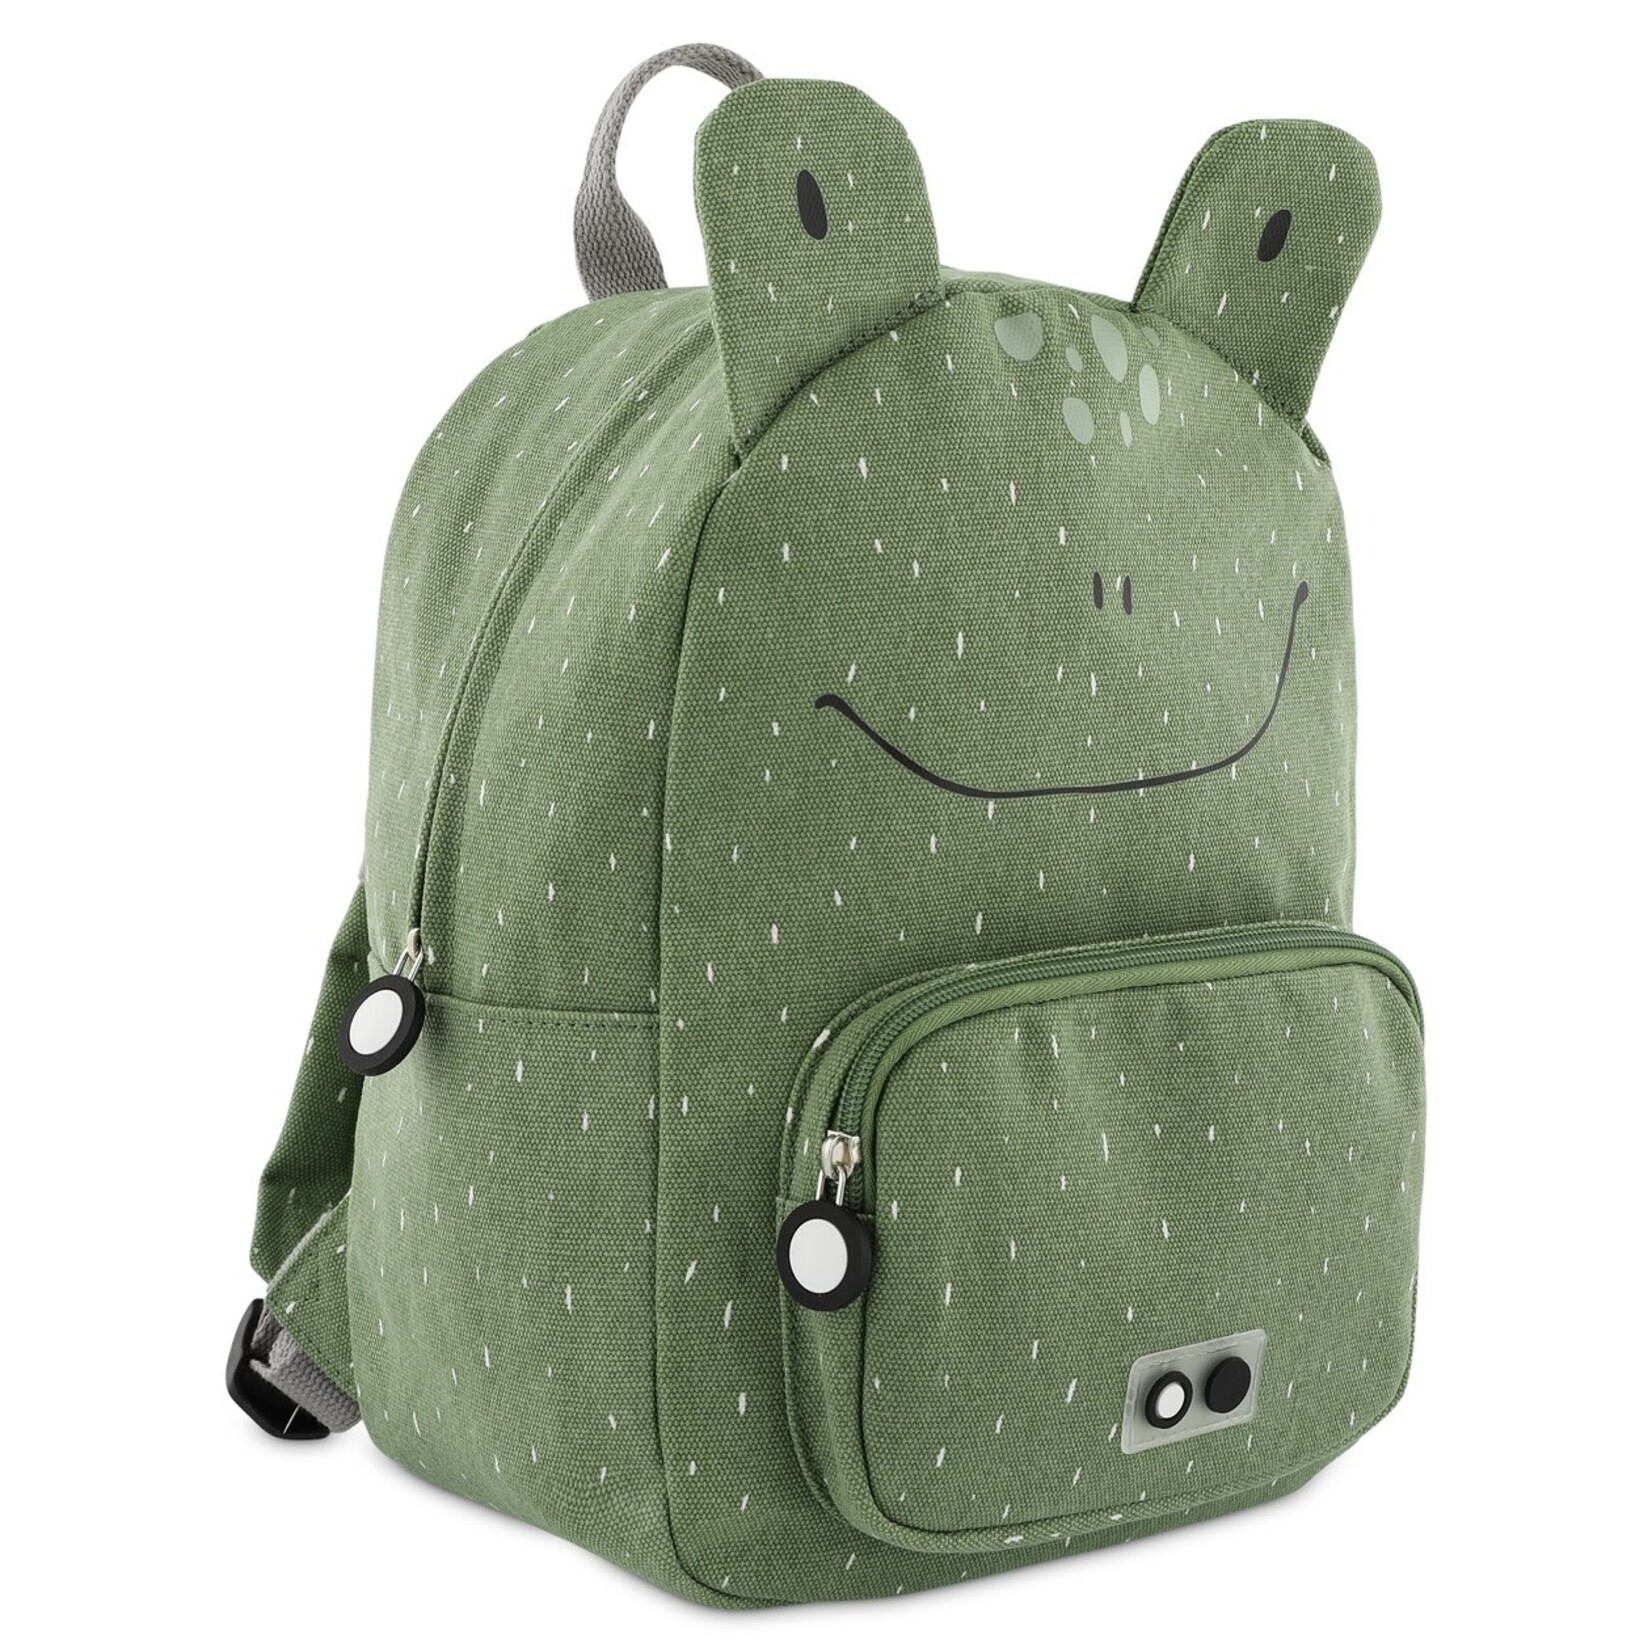 Trixie Trixie - Backpack - Mr. Frog